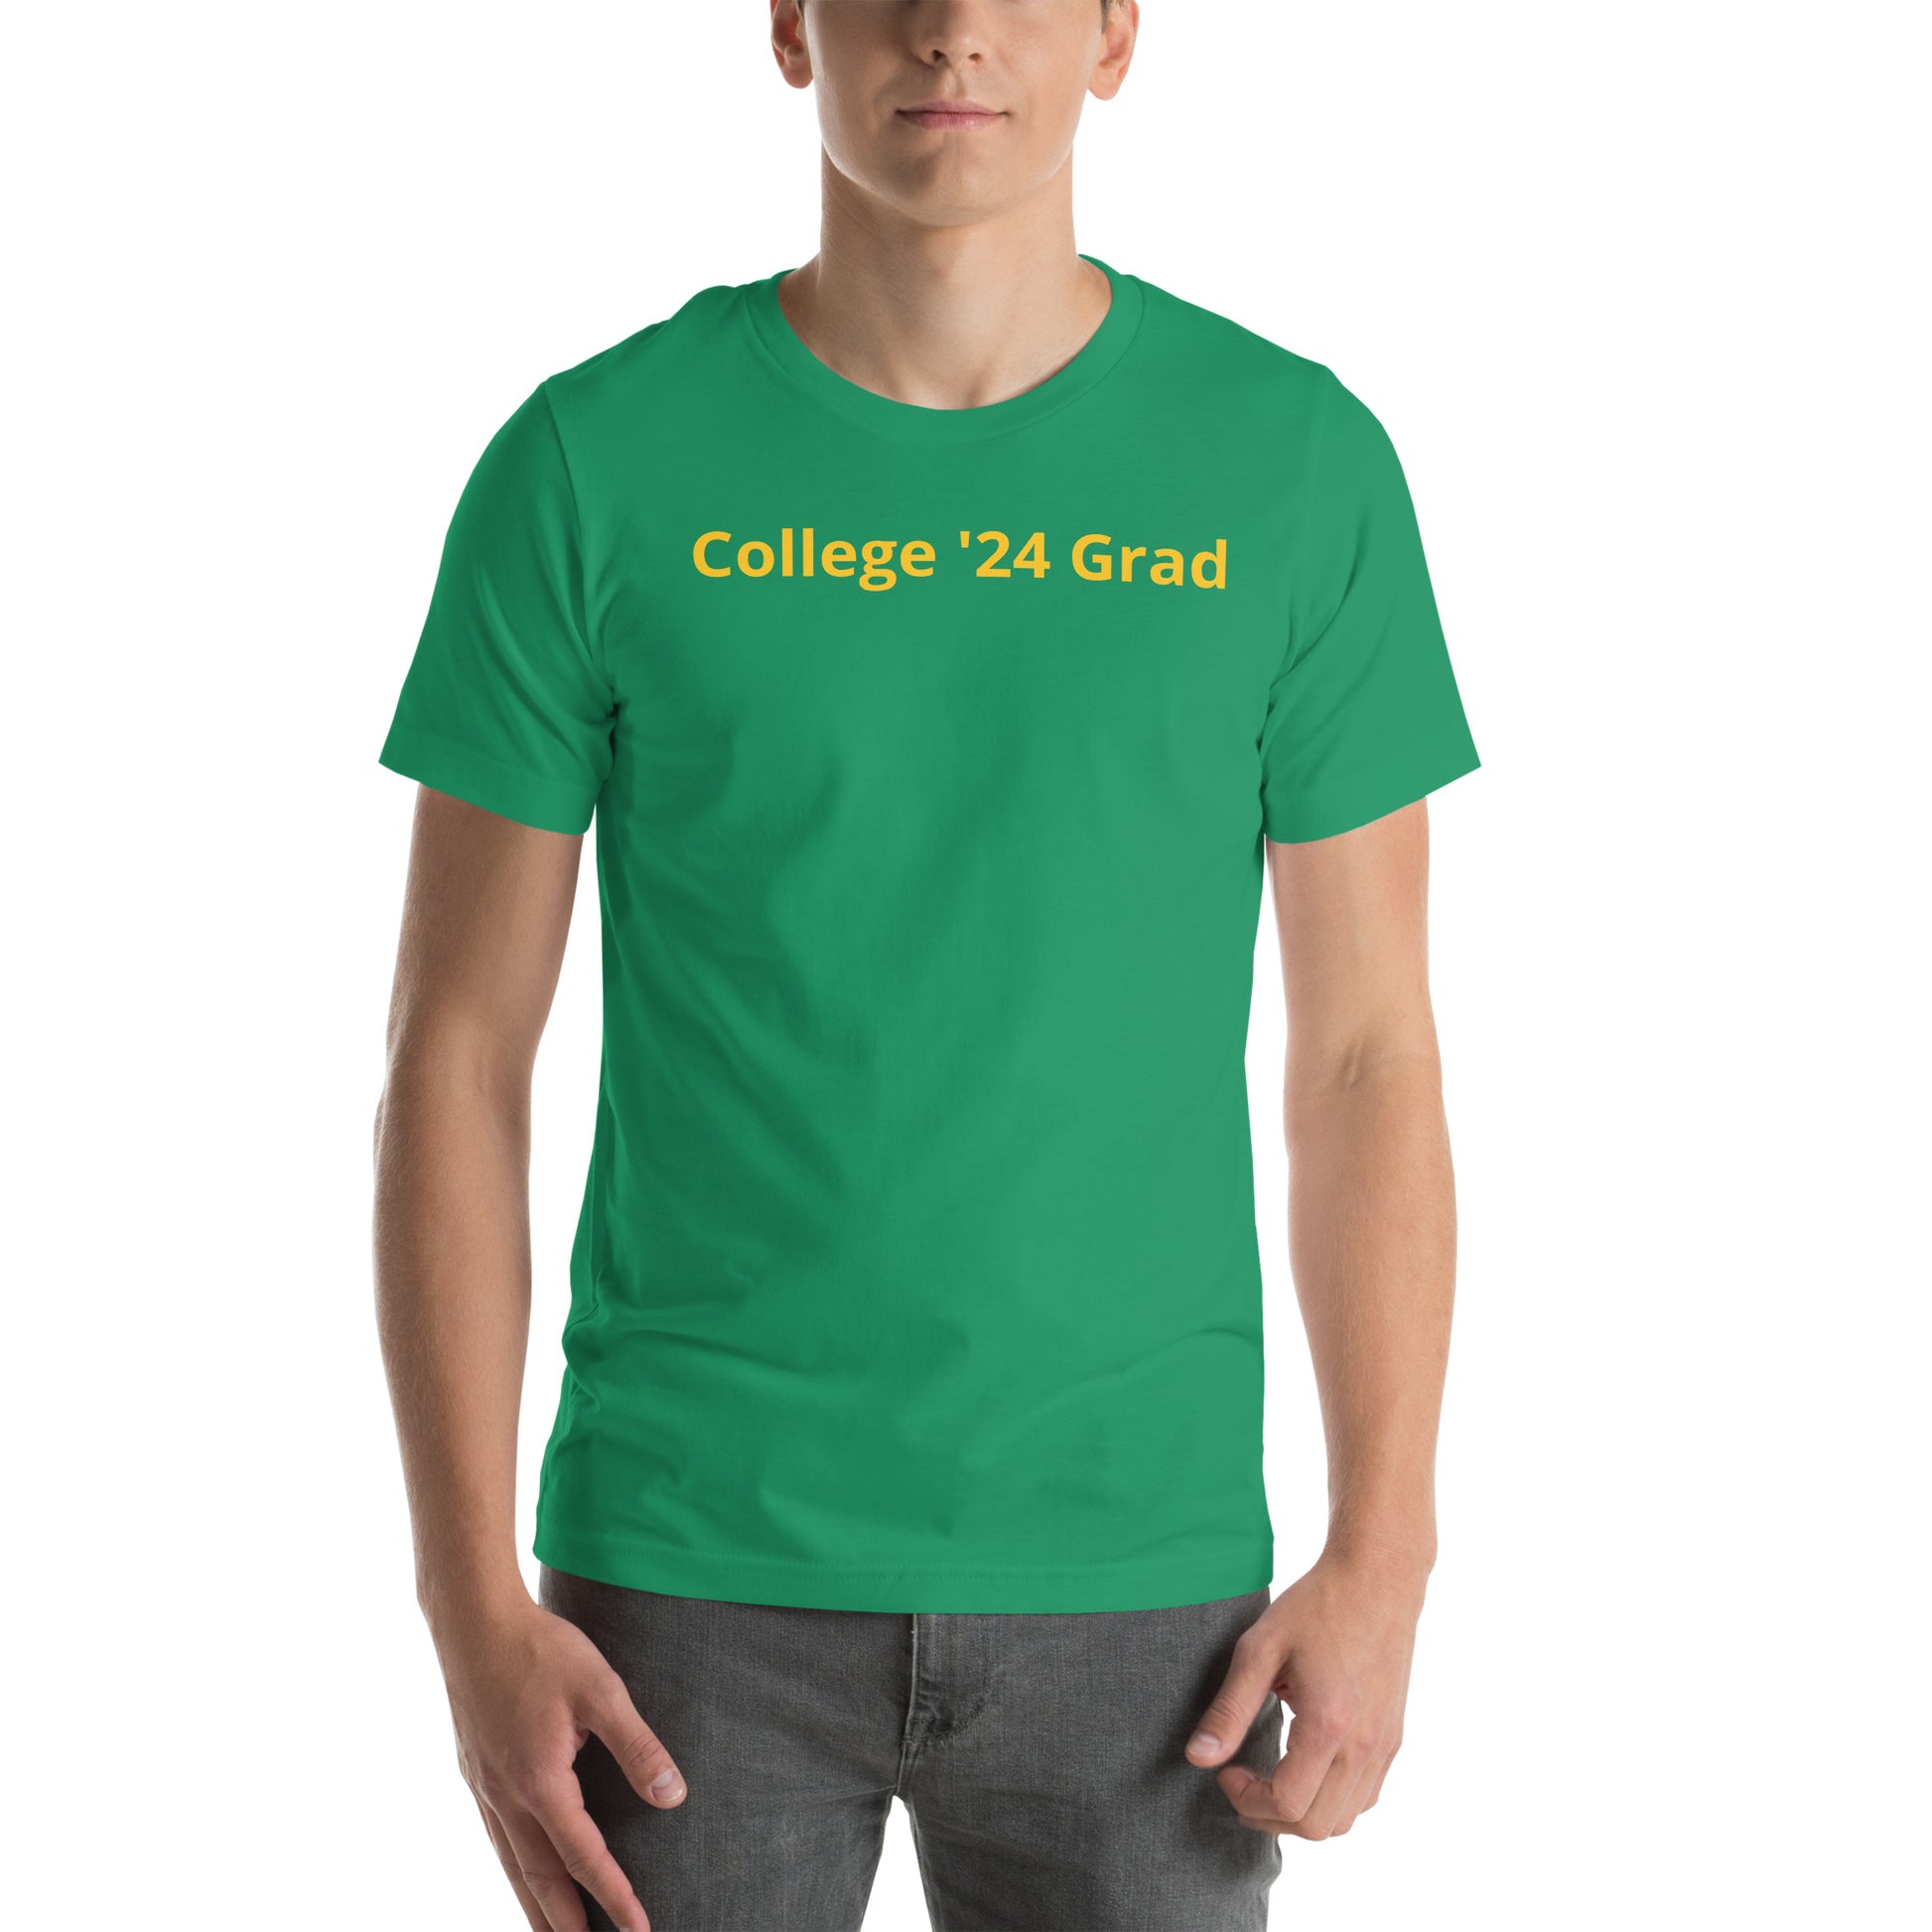 Kelly green color short sleeve tee shirt that says "College '24 Grad" on the front and "Thank you, Mom & Dad" on the back in yellow-gold font